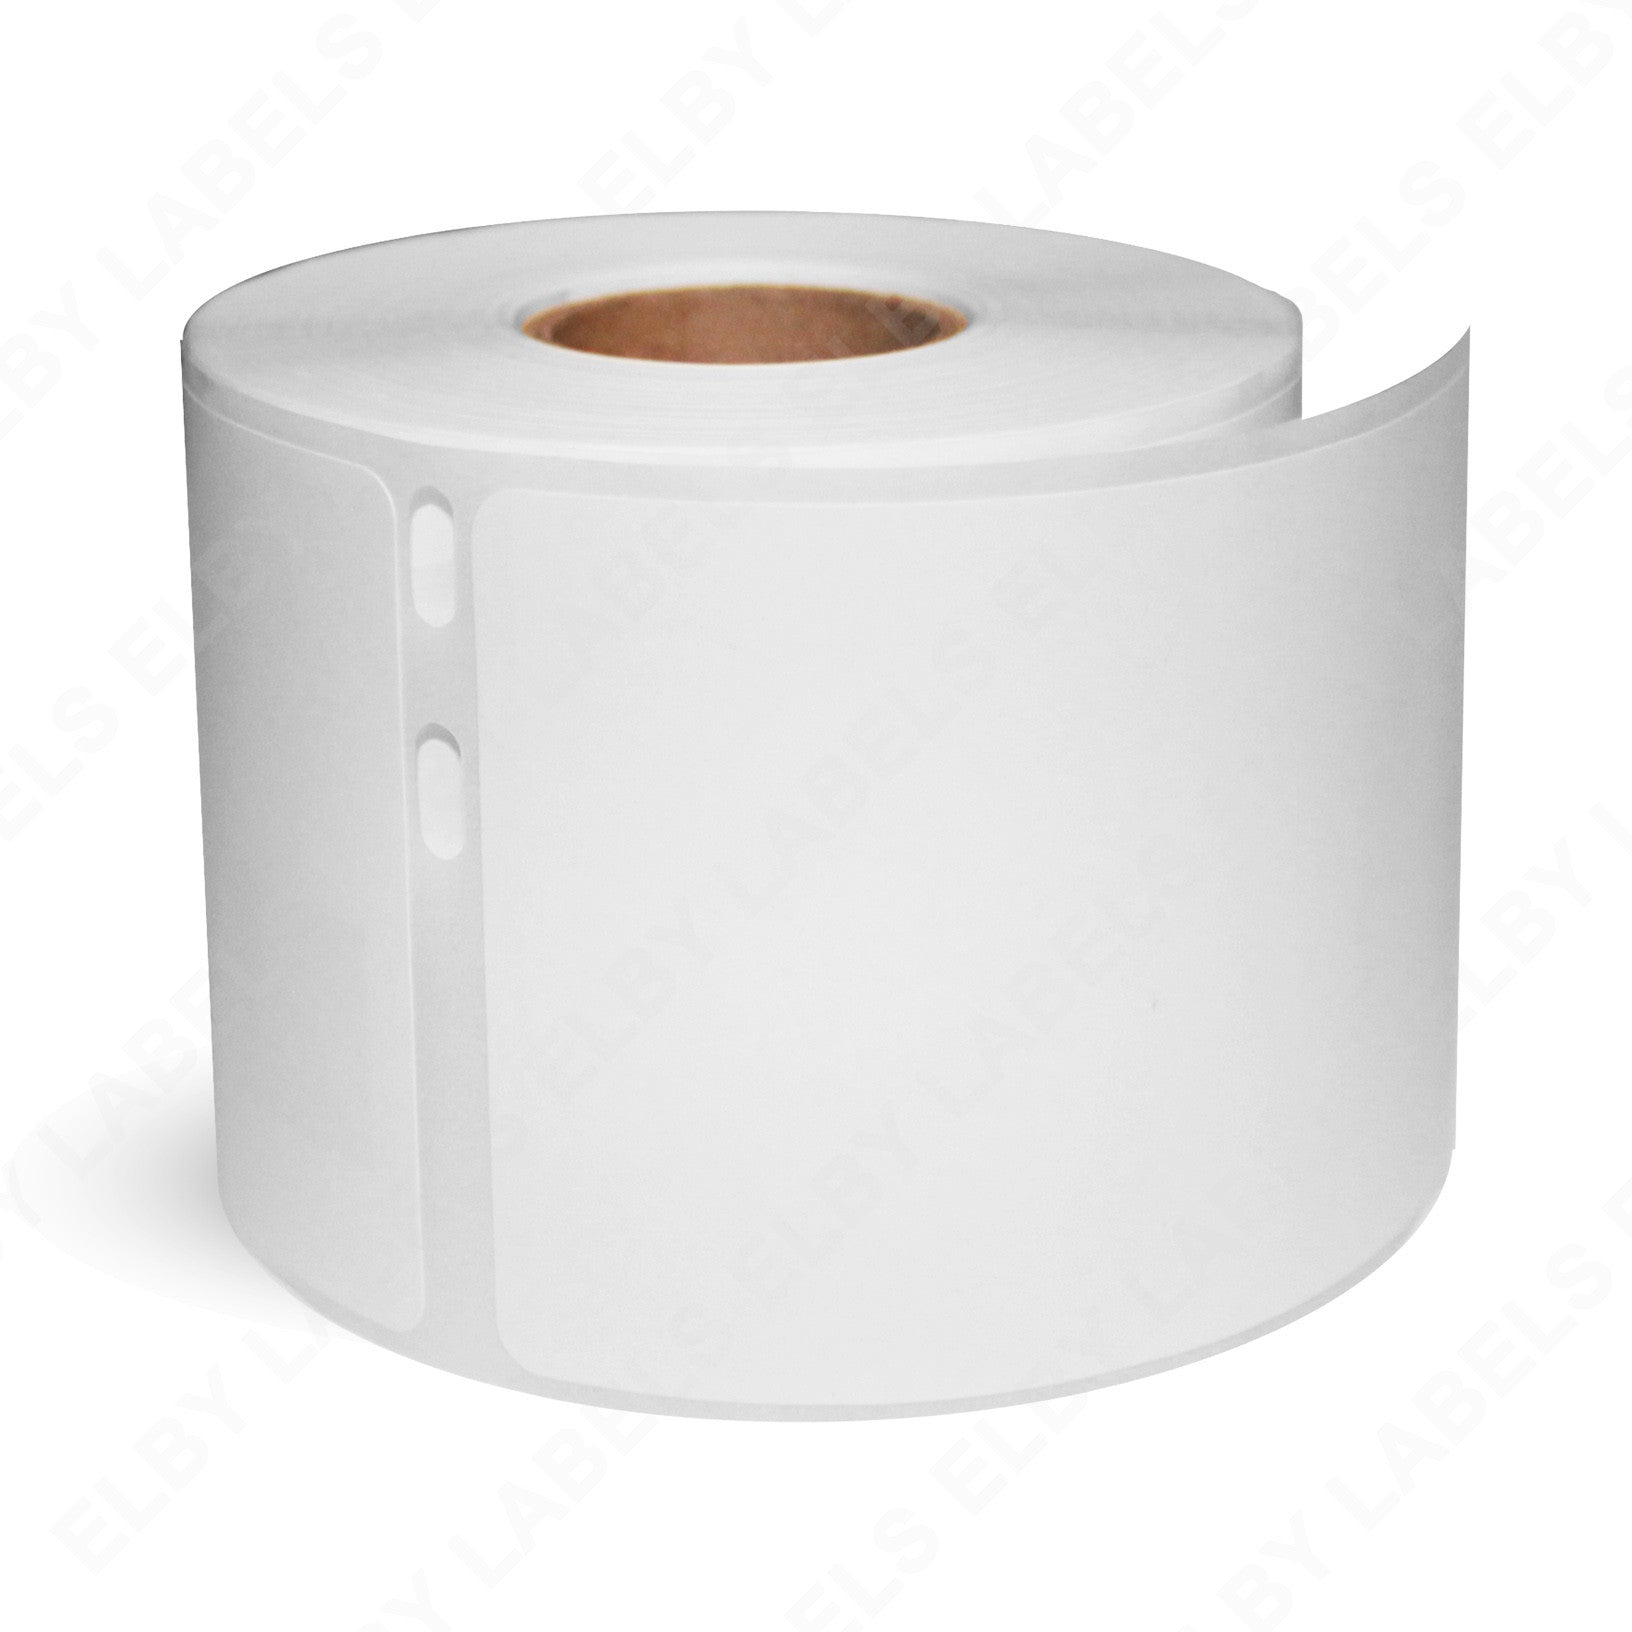 2-1/8 X 4 Small Shipping Labels - Direct Thermal Ultra Removable Paper - DYMO  30323 Compatible - 220 Labels/Roll- White, LD-30323-UR